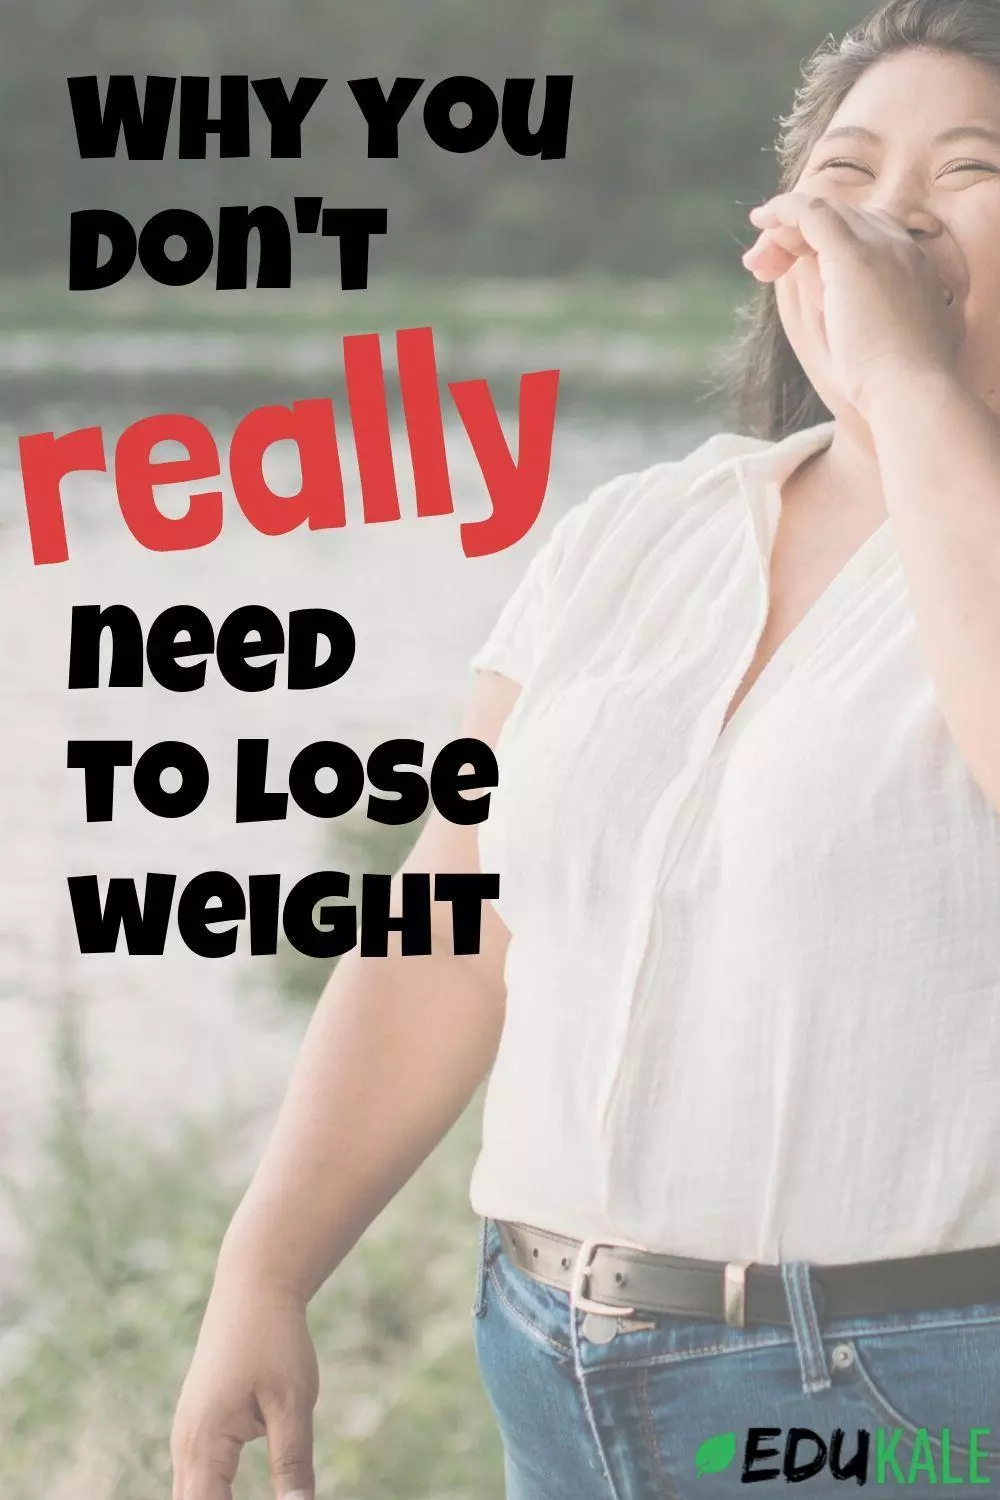 Why you don't really need to lose weight